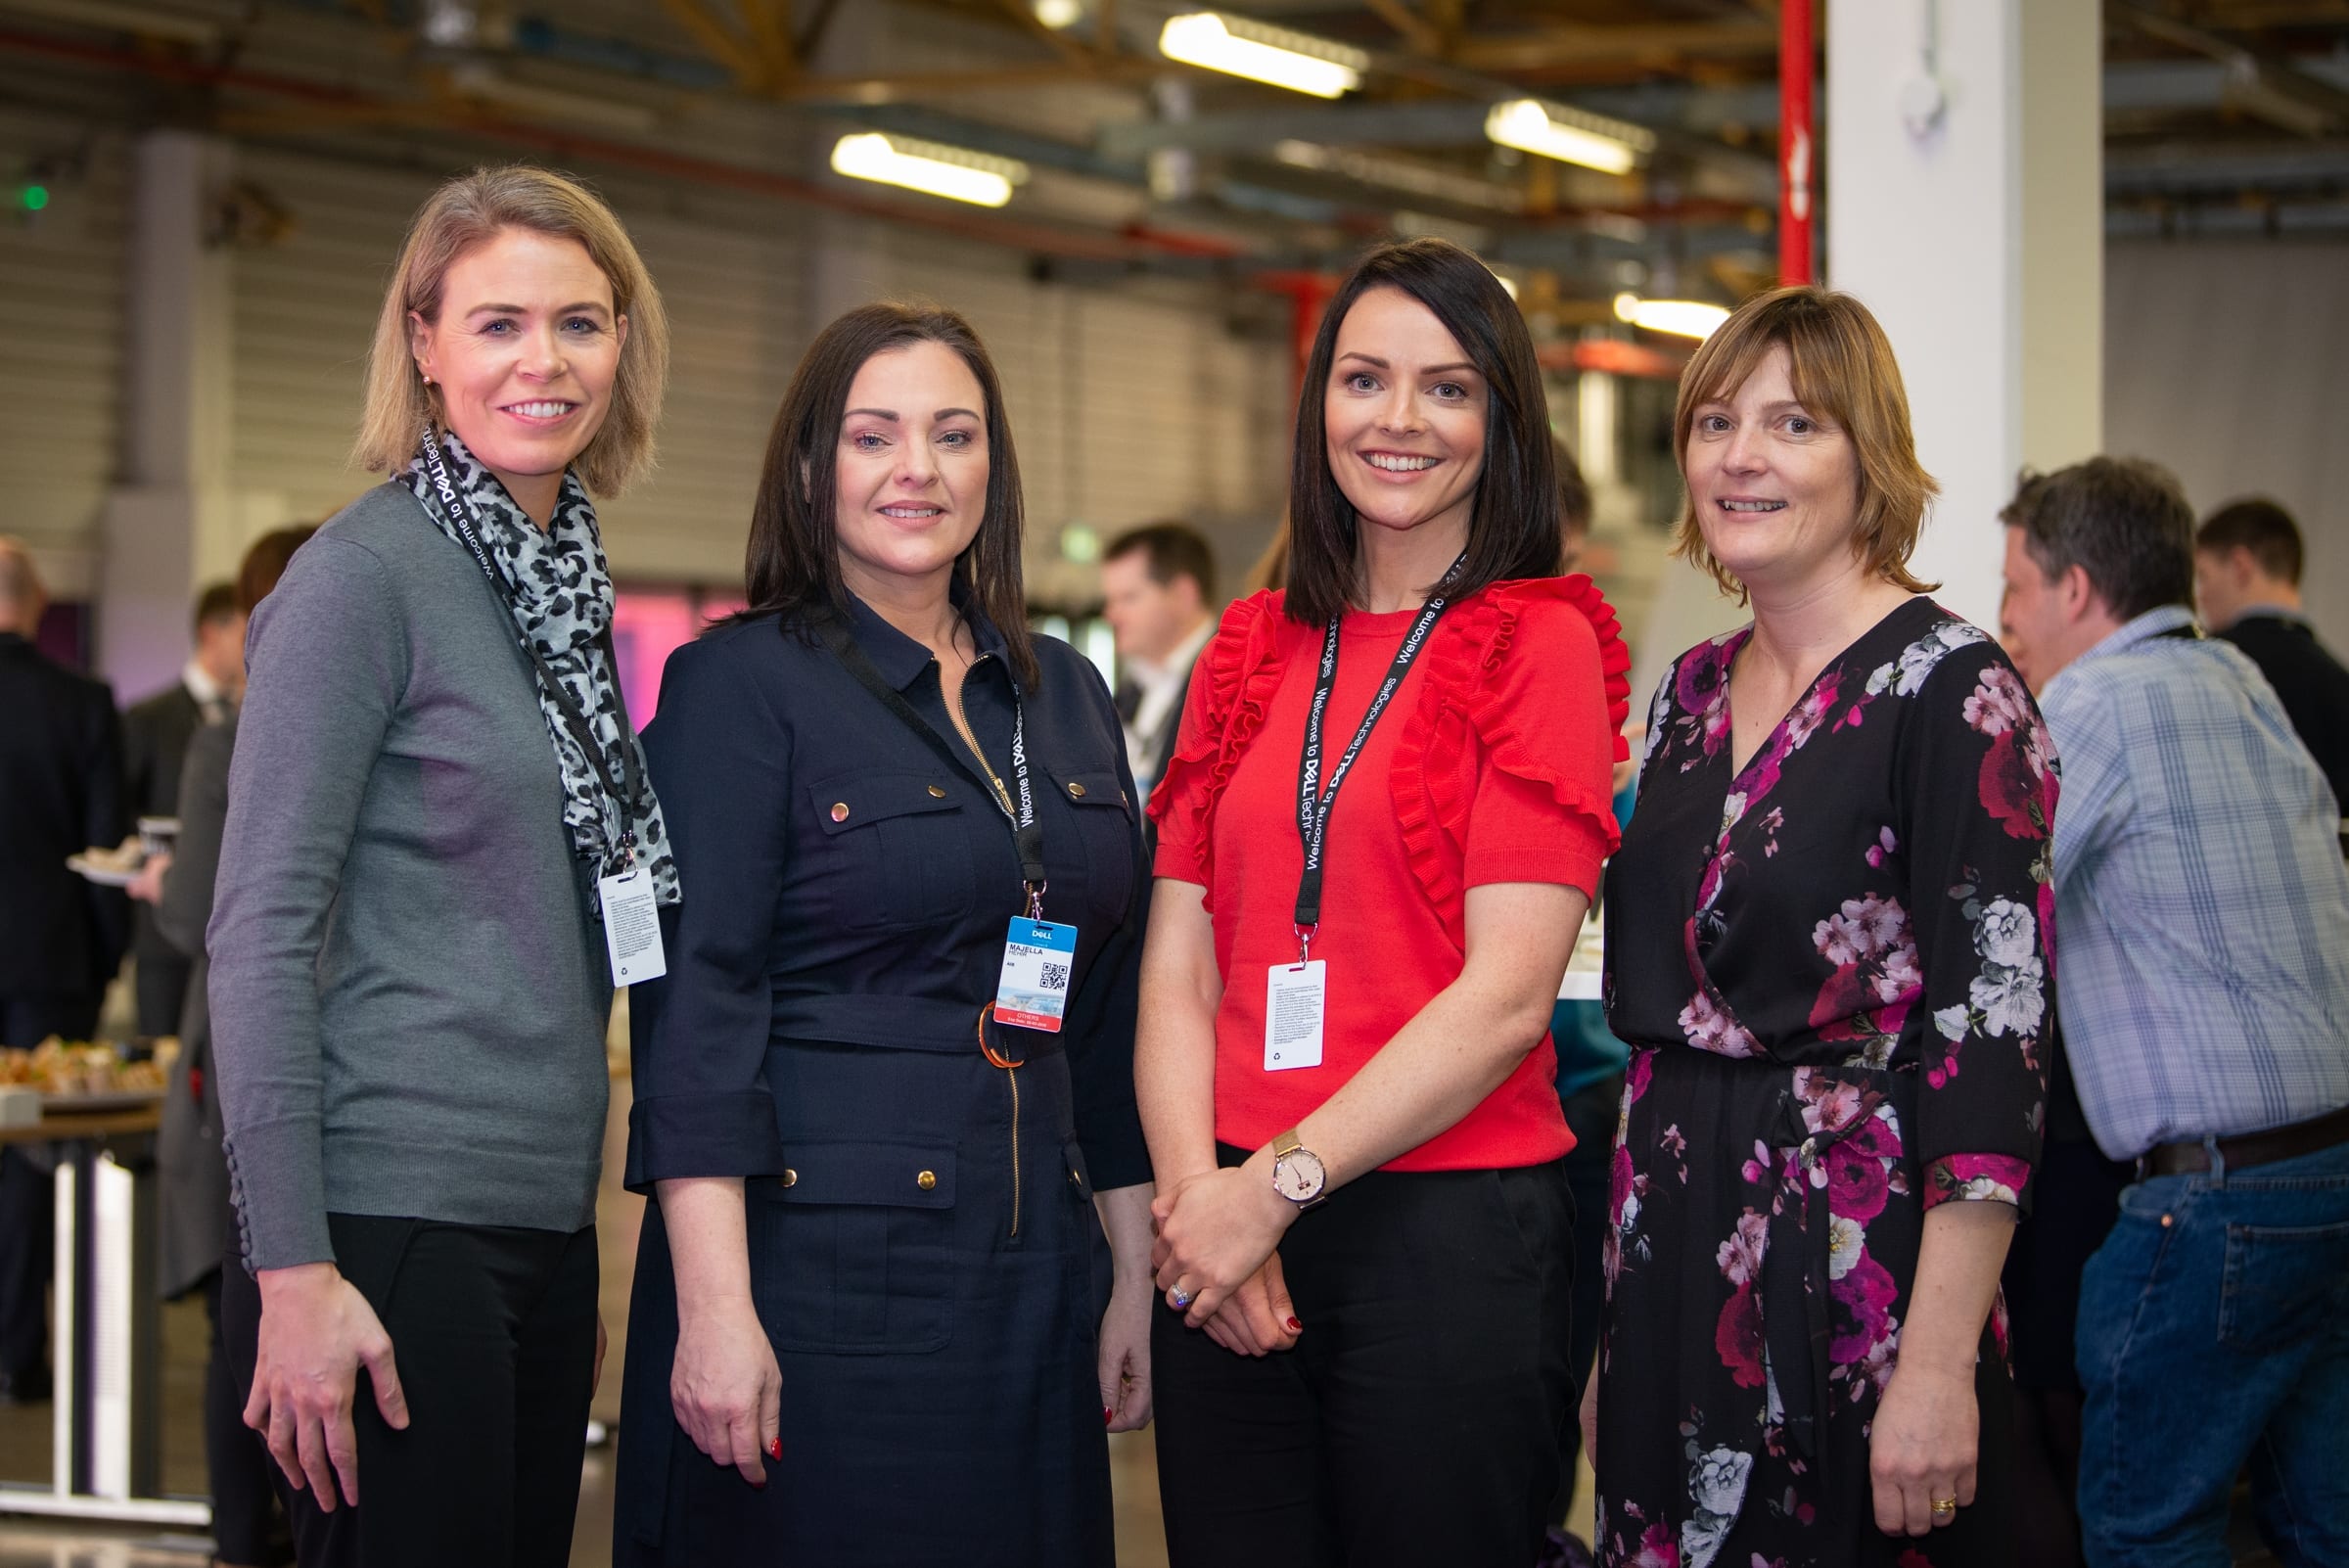 No repro fee-RLP Programme Launch which was held in DELL EMC, Raheen Industrial Est Limerick on Thursday 6th February - From Left to Right: Deirdre Tuohy , Majella Hehir, Colleen Shannon and Barbara Curran all from AIB. 
Photo credit Shauna Kennedy